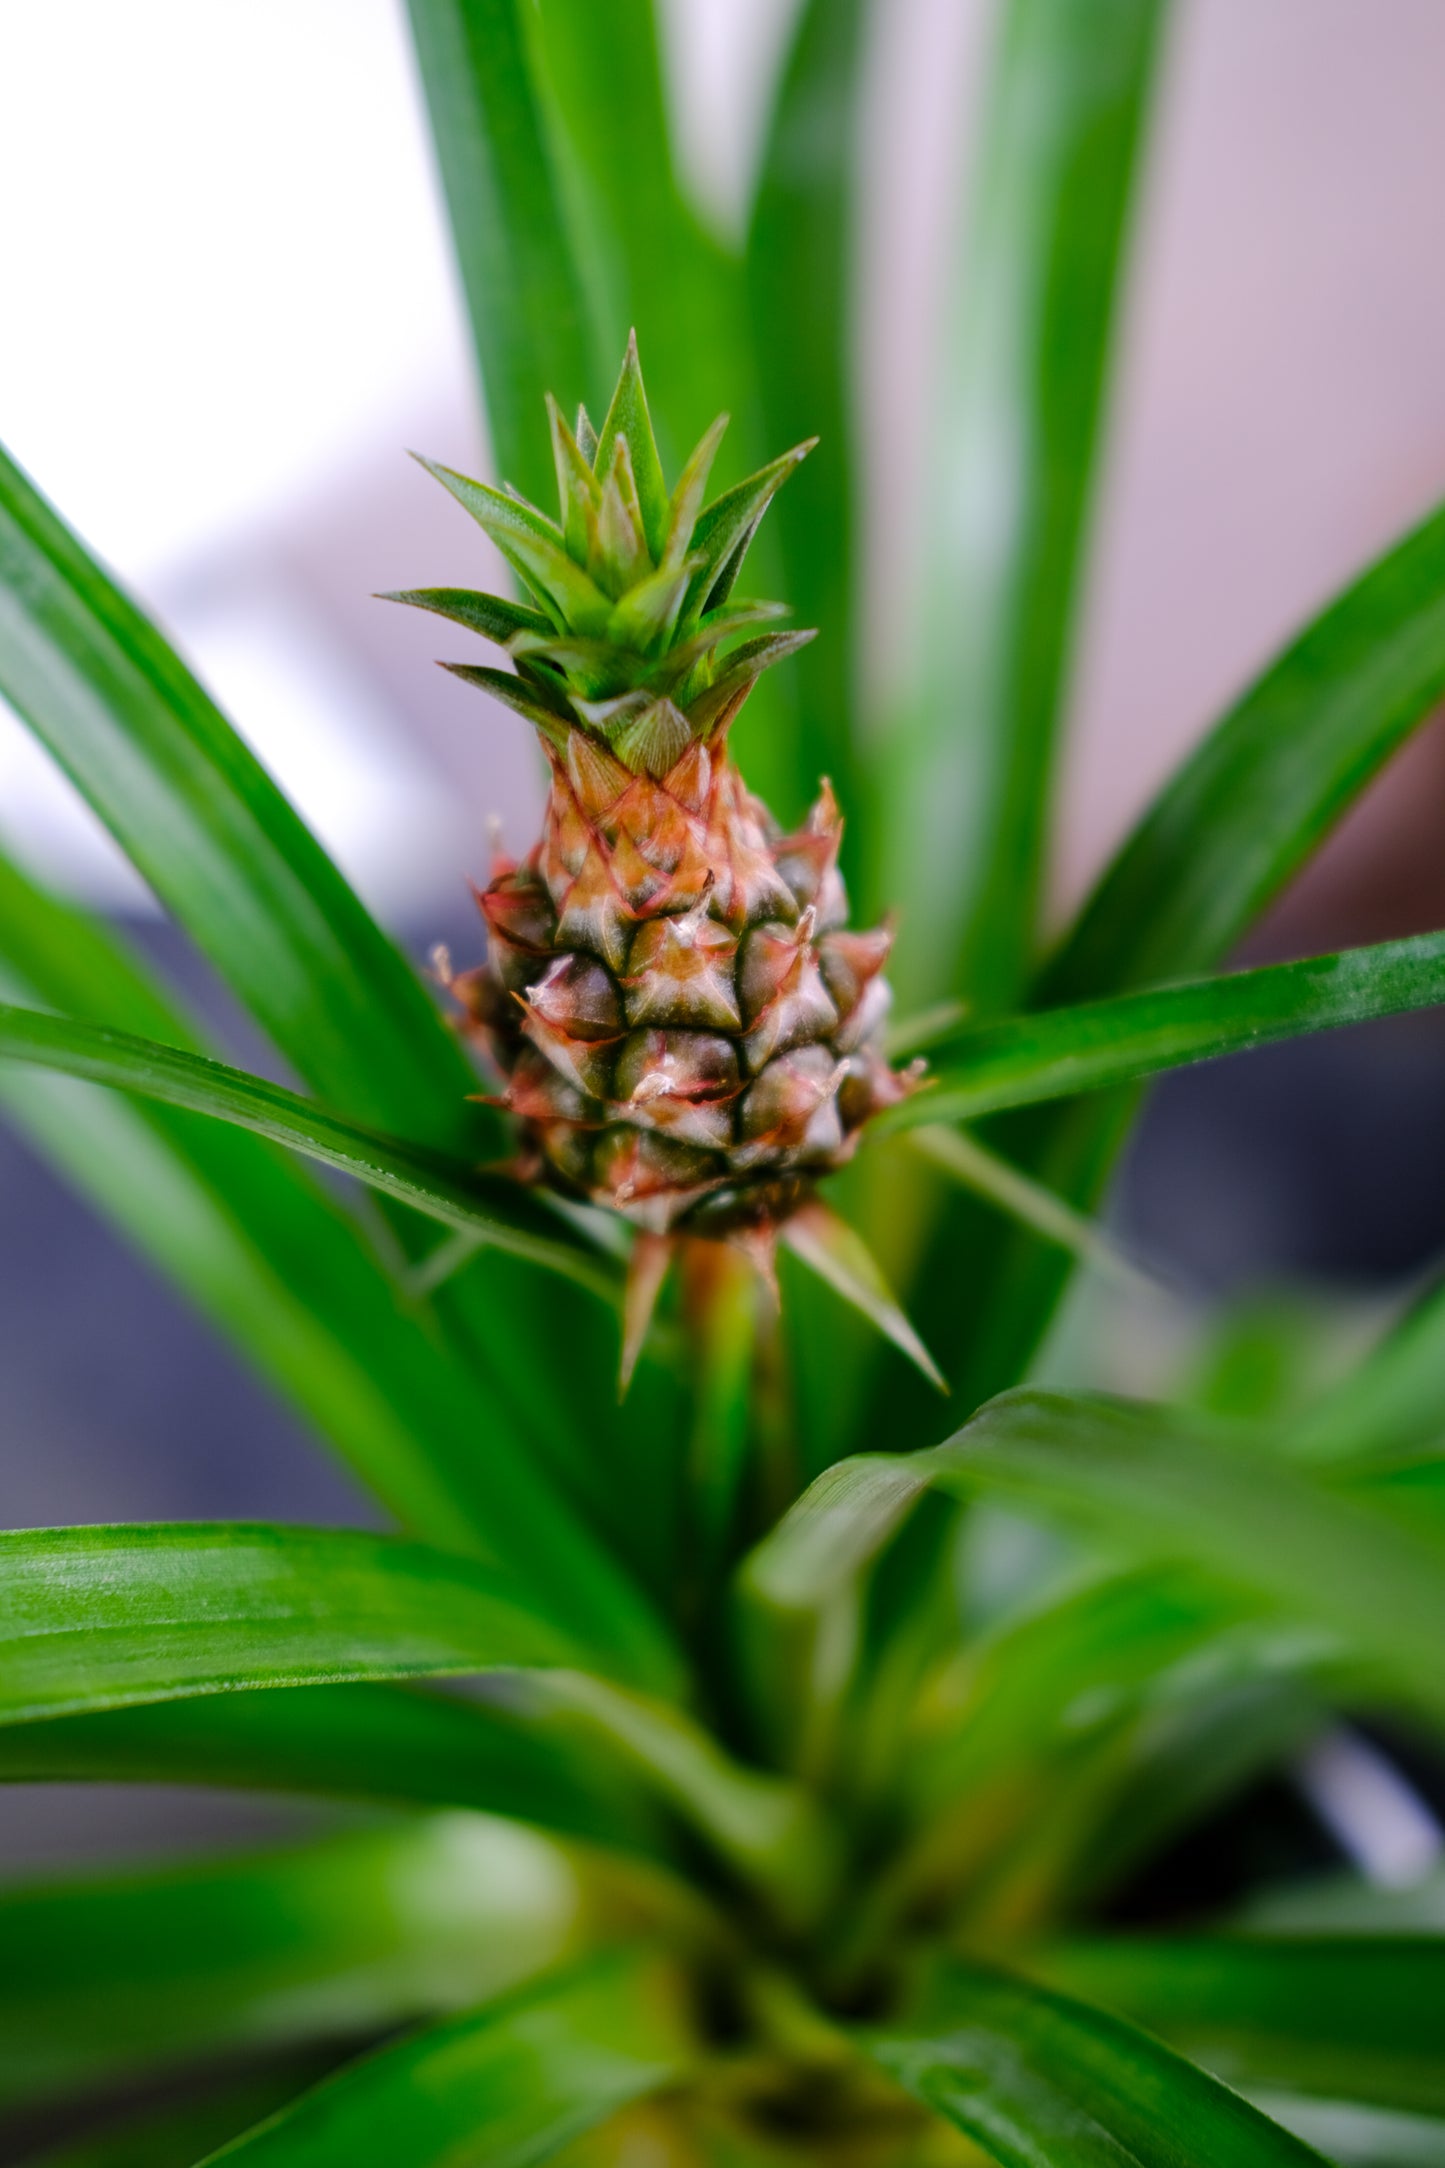 Dwarf Pineapple Plant (Ananas ananassoides) in a 5 inch pot. Indoor plant for sale by Promise Supply for delivery and pickup in Toronto